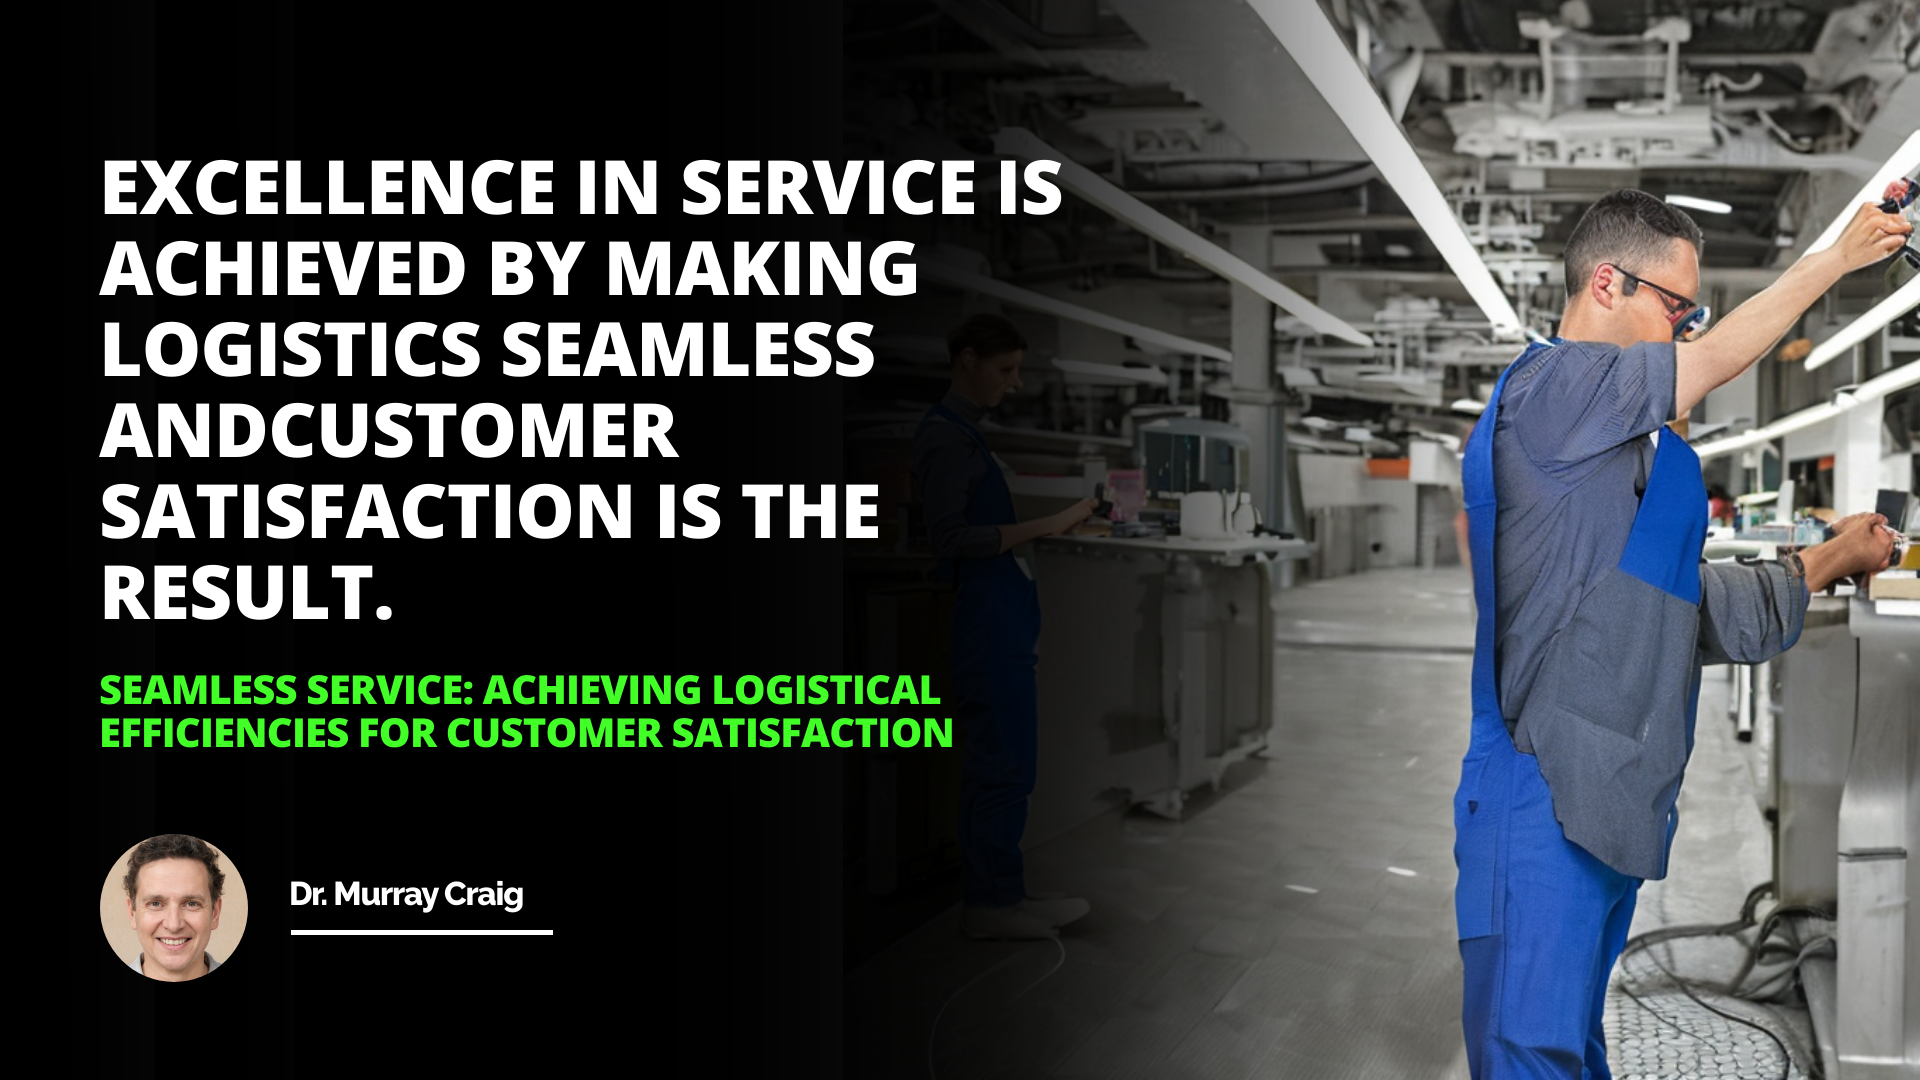 Seamless Service: Achieving Logistical Efficiencies for Customer